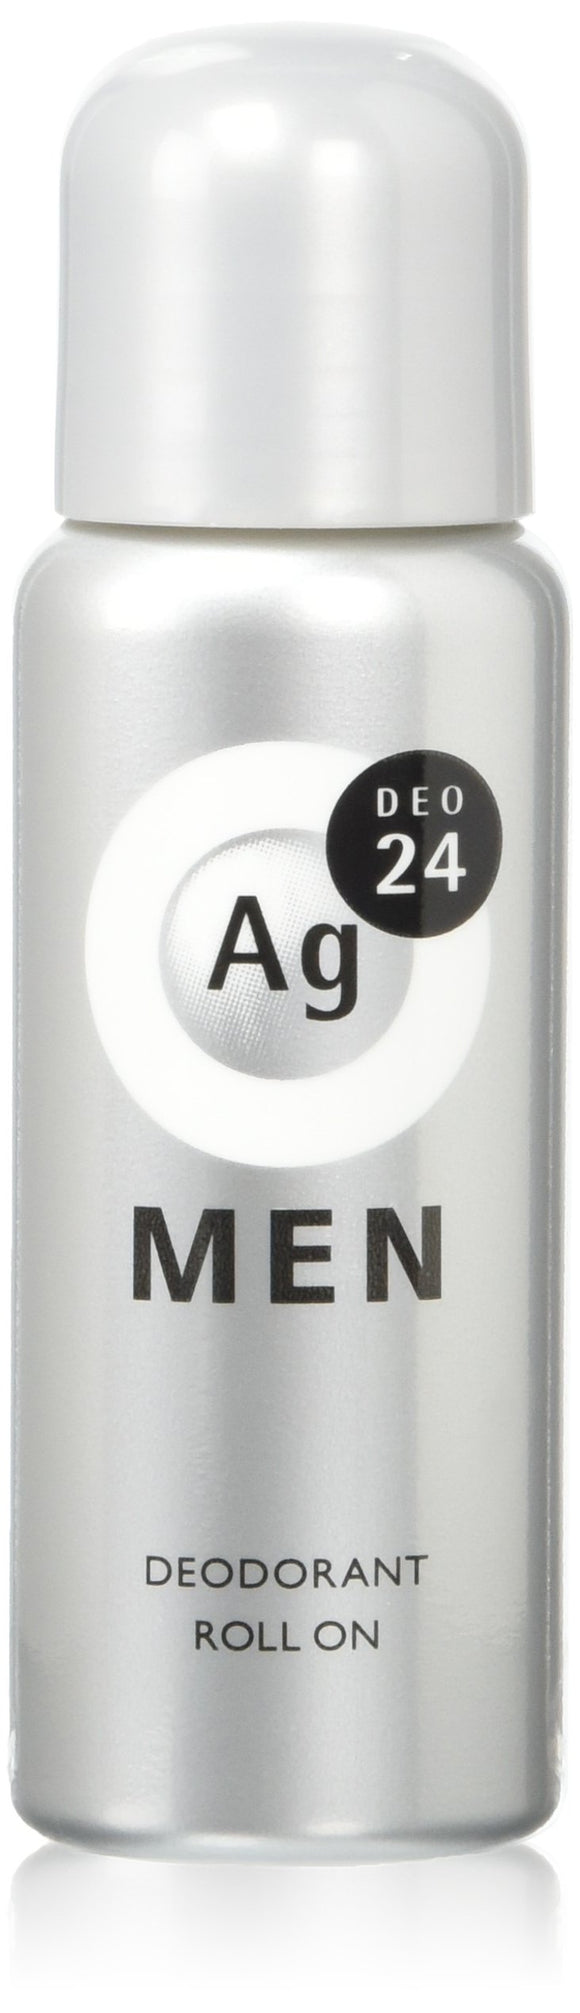 Ag Deo 24 Men's Deodorant Roll-on Unscented 2.0 fl oz (60 ml)